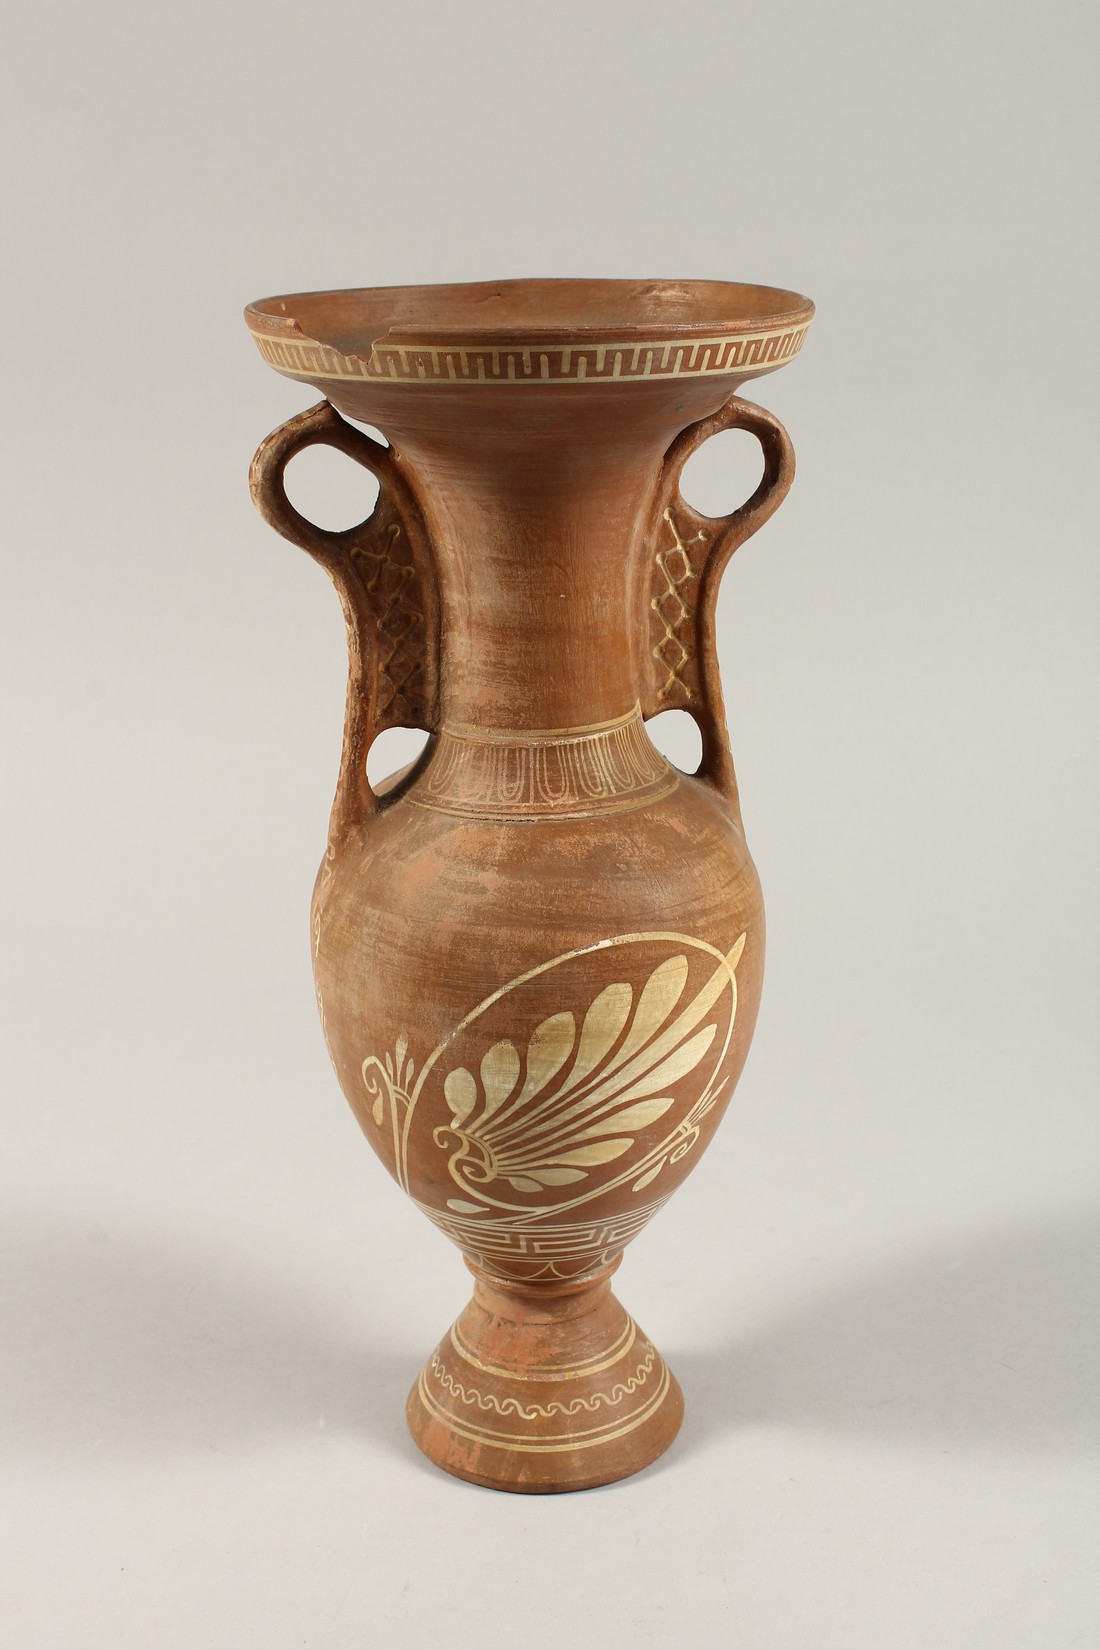 A GRAND TOUR GREEK TWO HANDLED TERRA COTTA VASE 13ins high. - Image 2 of 4